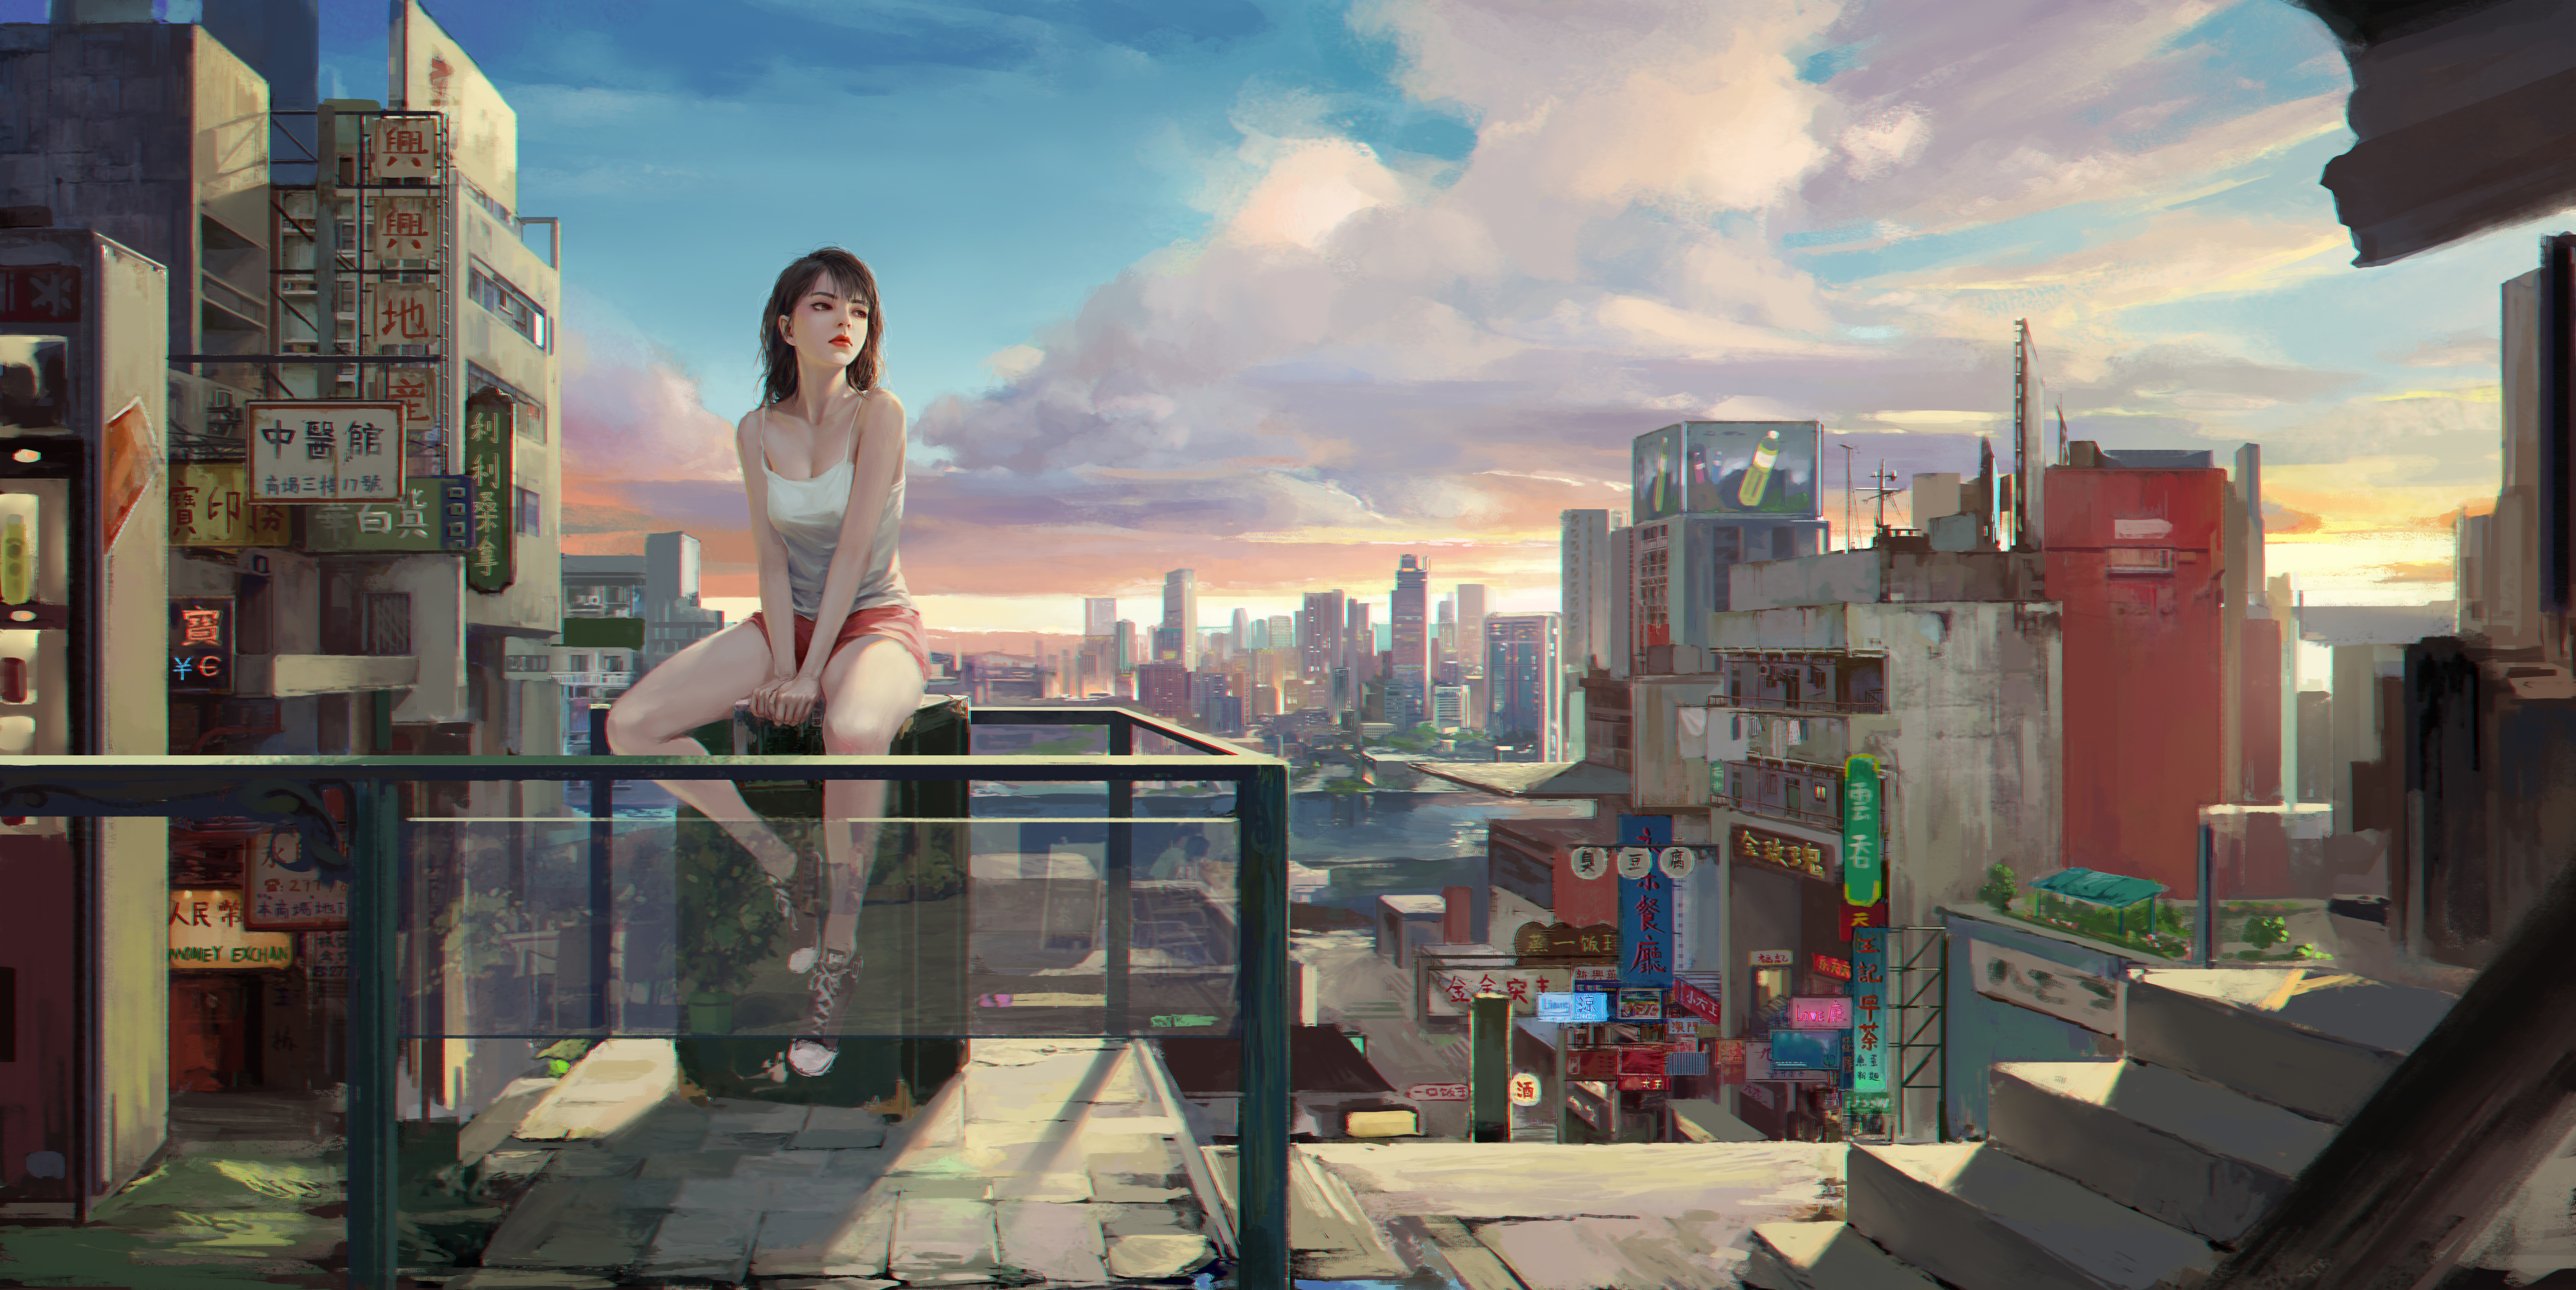 General 12000x6008 looking into the distance shorts landscape artwork cityscape Chaichan Artwichai sky clouds looking sideways stairs building digital art